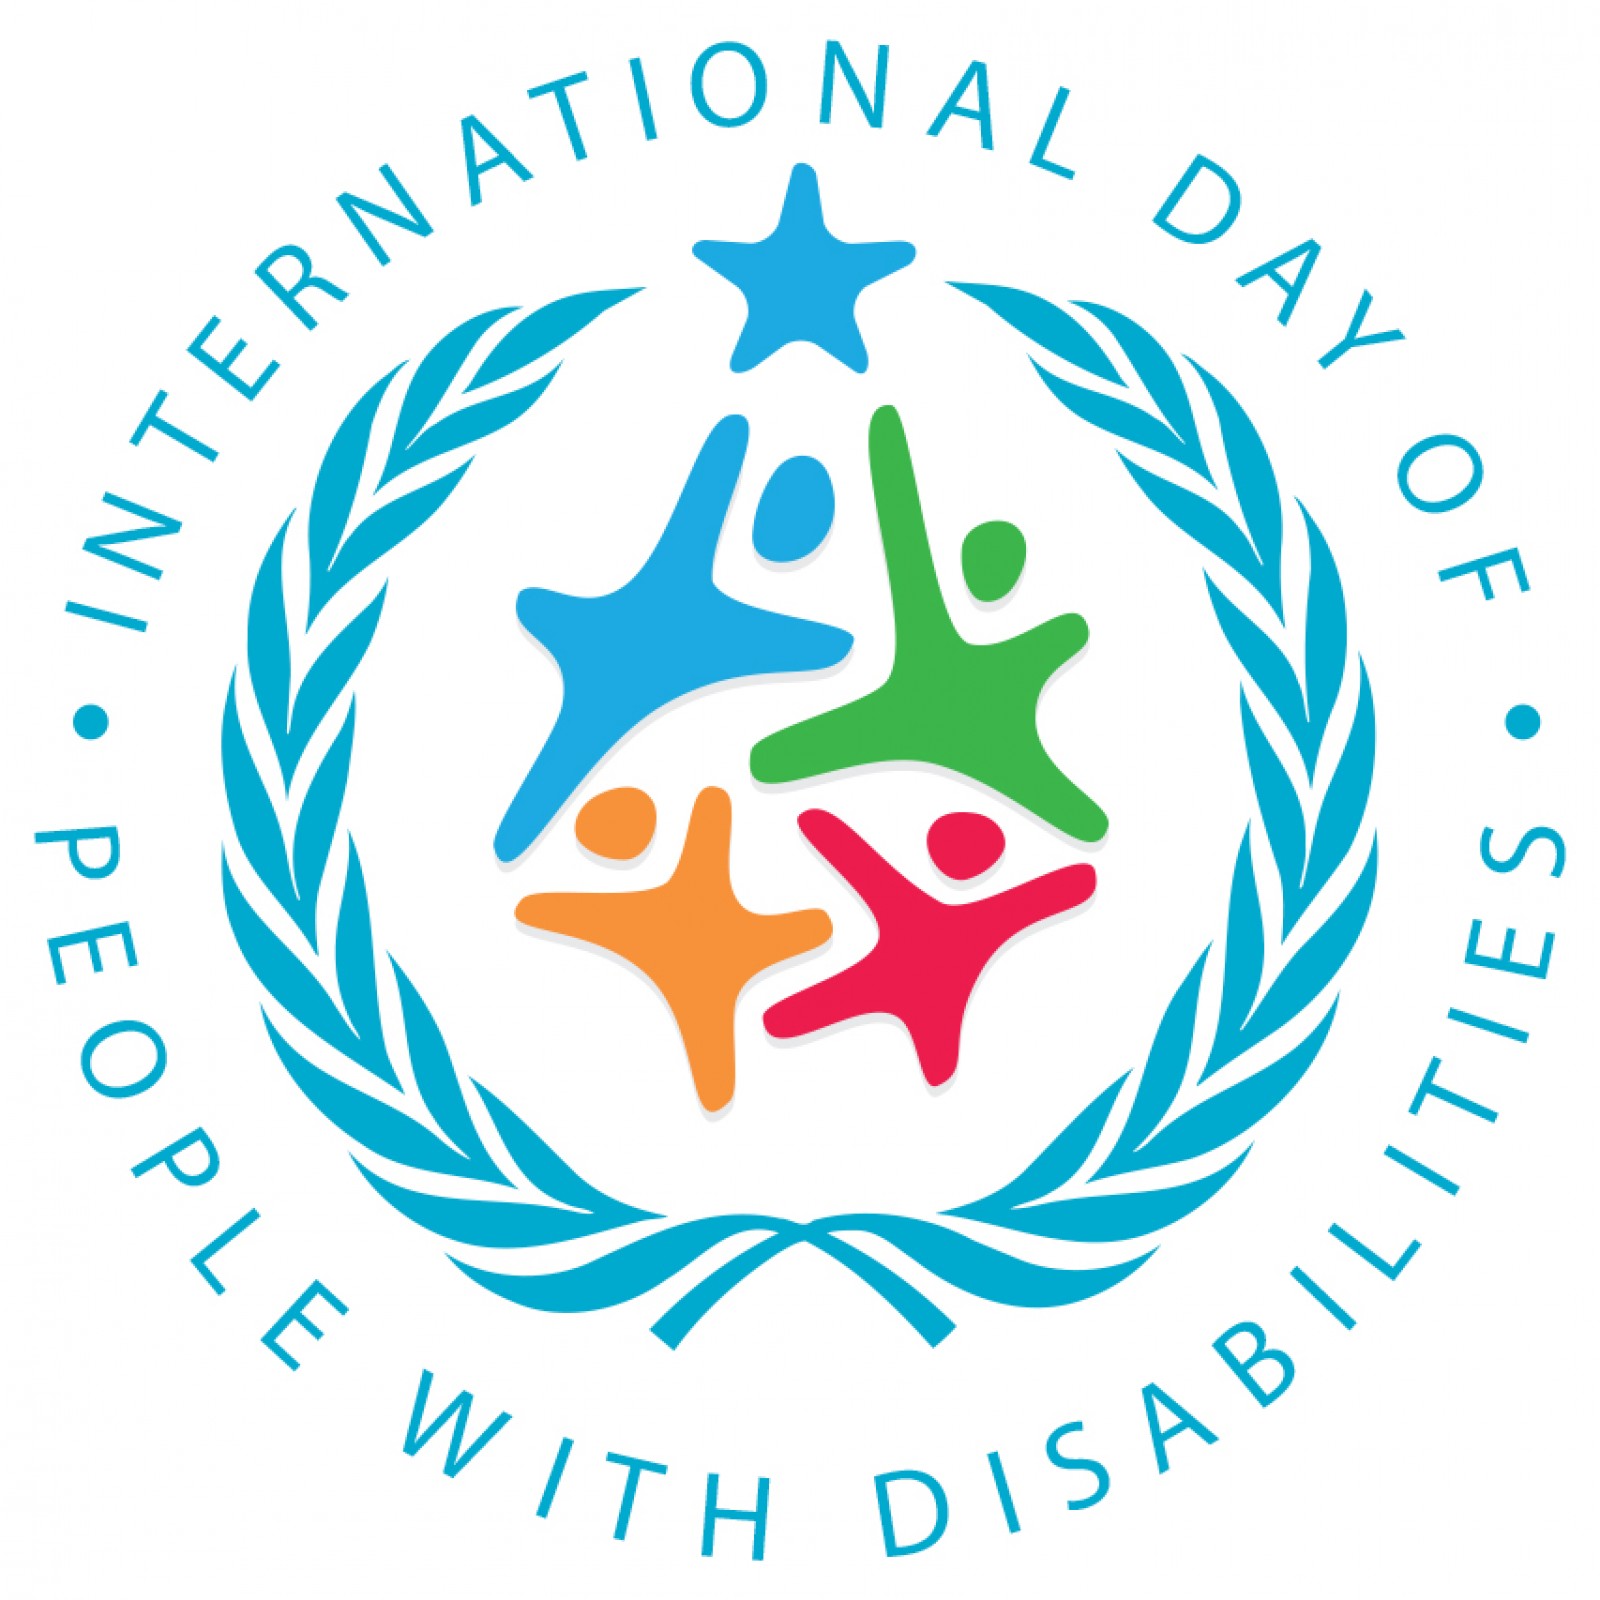 Happy International Day of Persons With Disabilities!